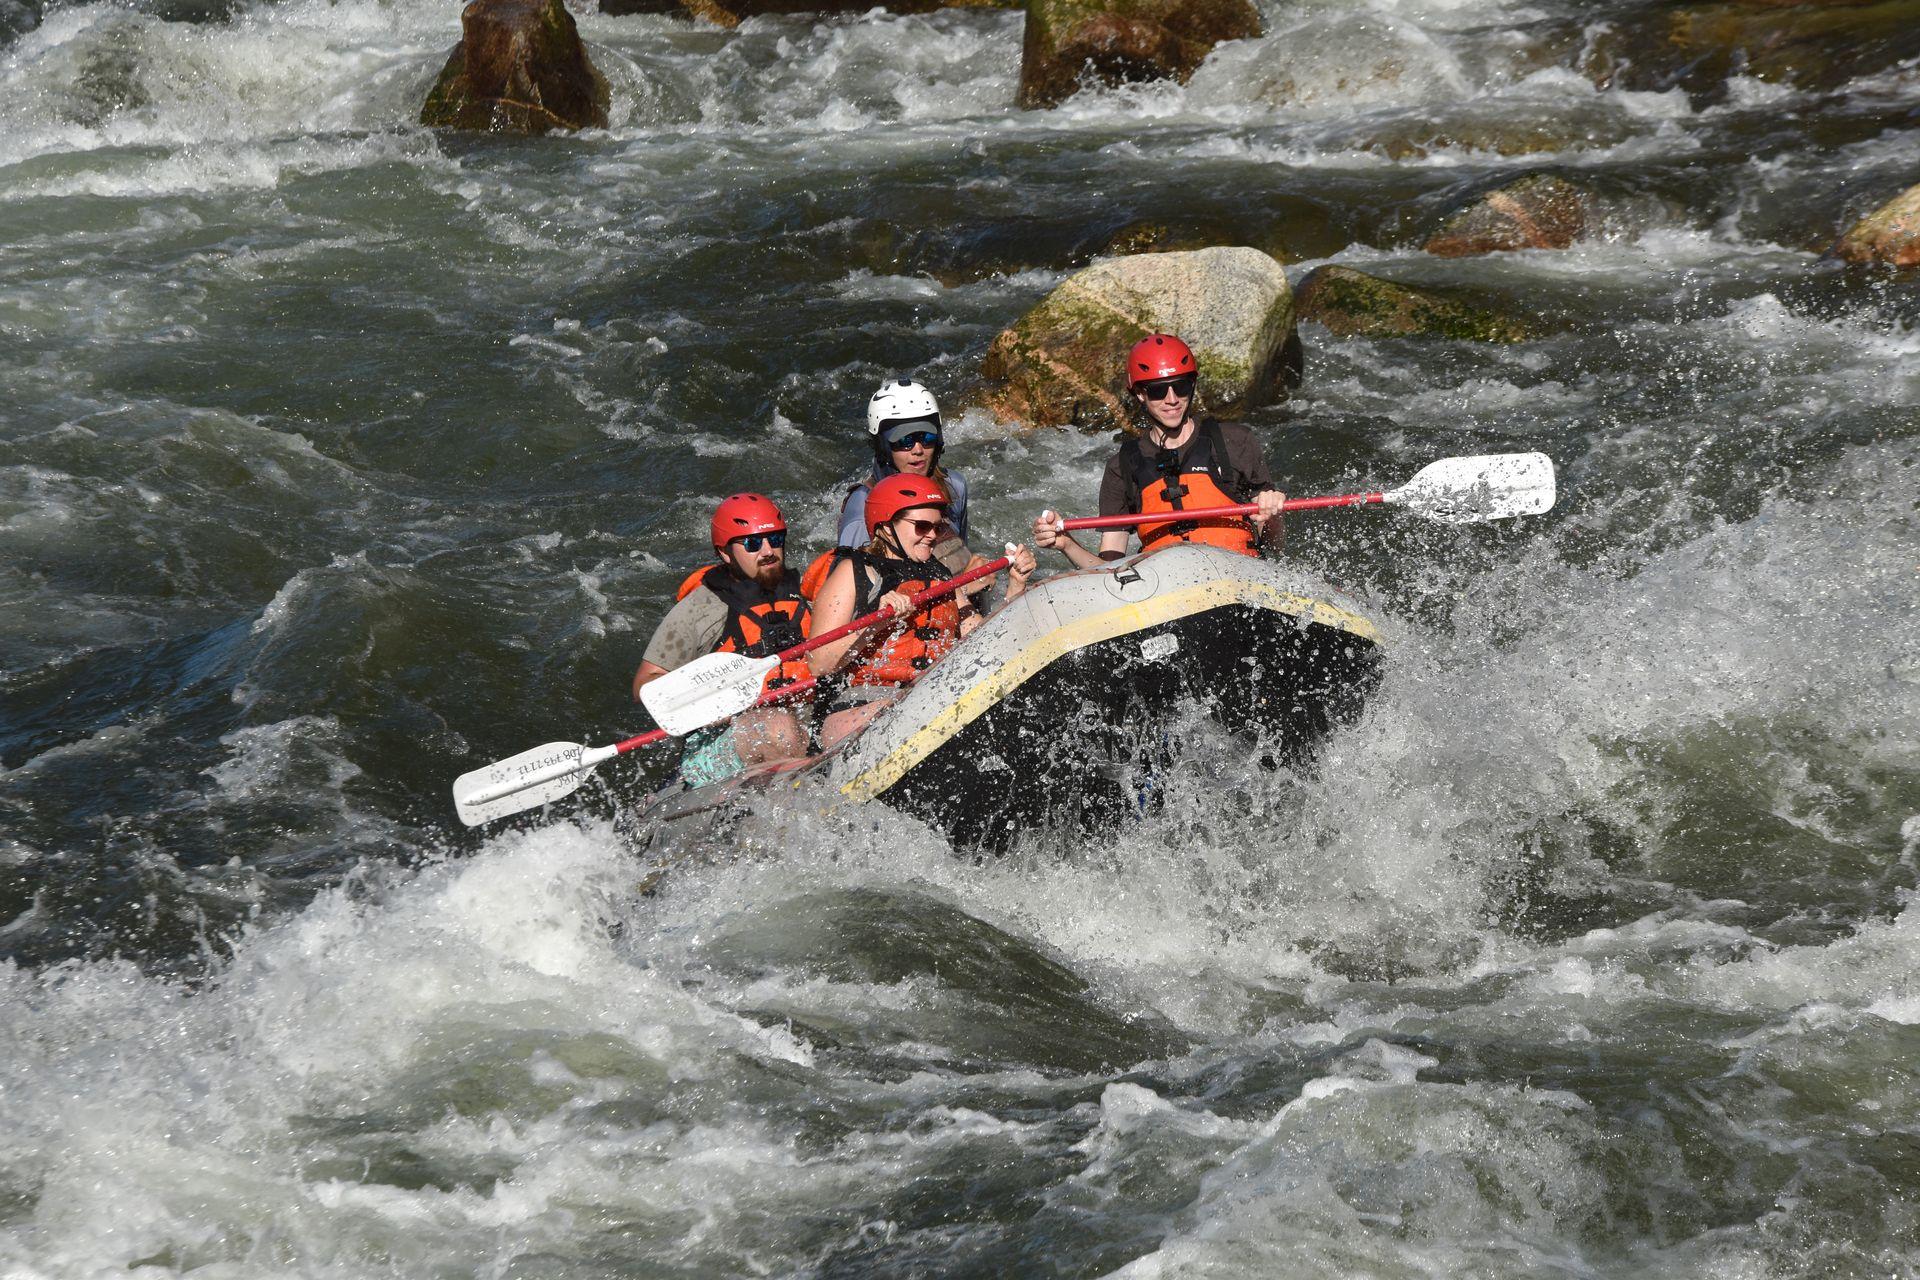 Lydia and others going over a rapid while white water rafting on the Payette River.